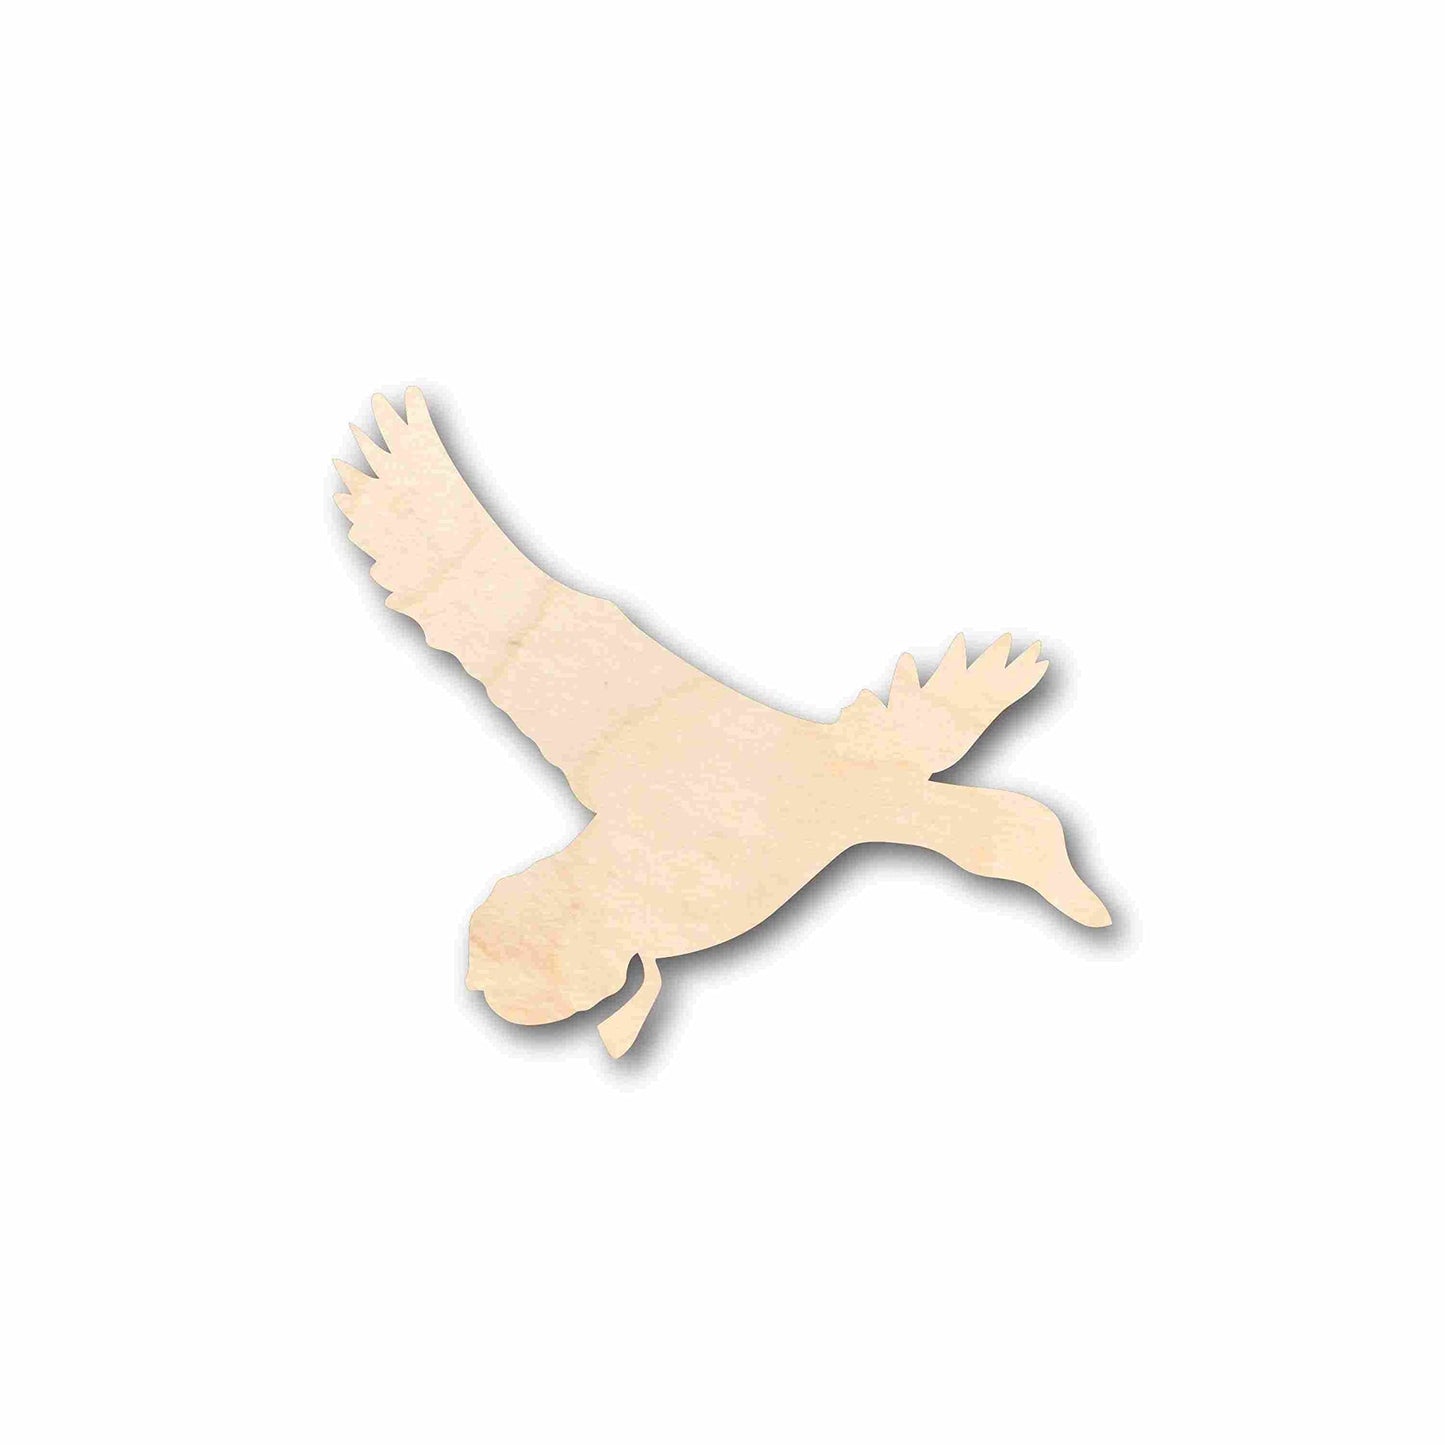 Unfinished Wood Duck Mallard Silhouette - Craft- up to 24" DIY 10" / 3/4"